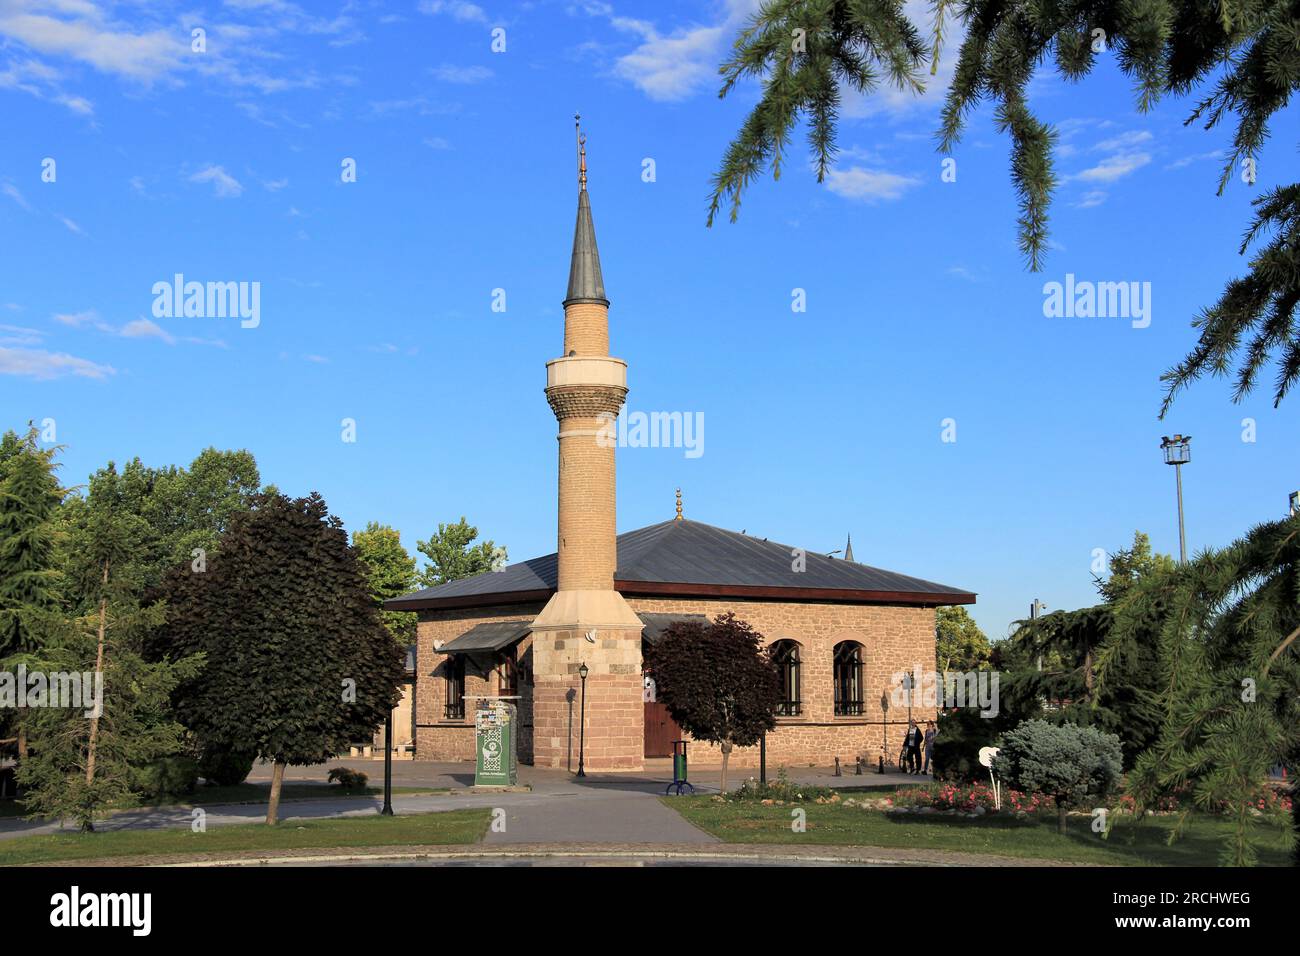 Tolluoglu Mosque was built in the last period of the Ottoman state. The mosque is located in the park next to the Karatay Municipality building. Stock Photo